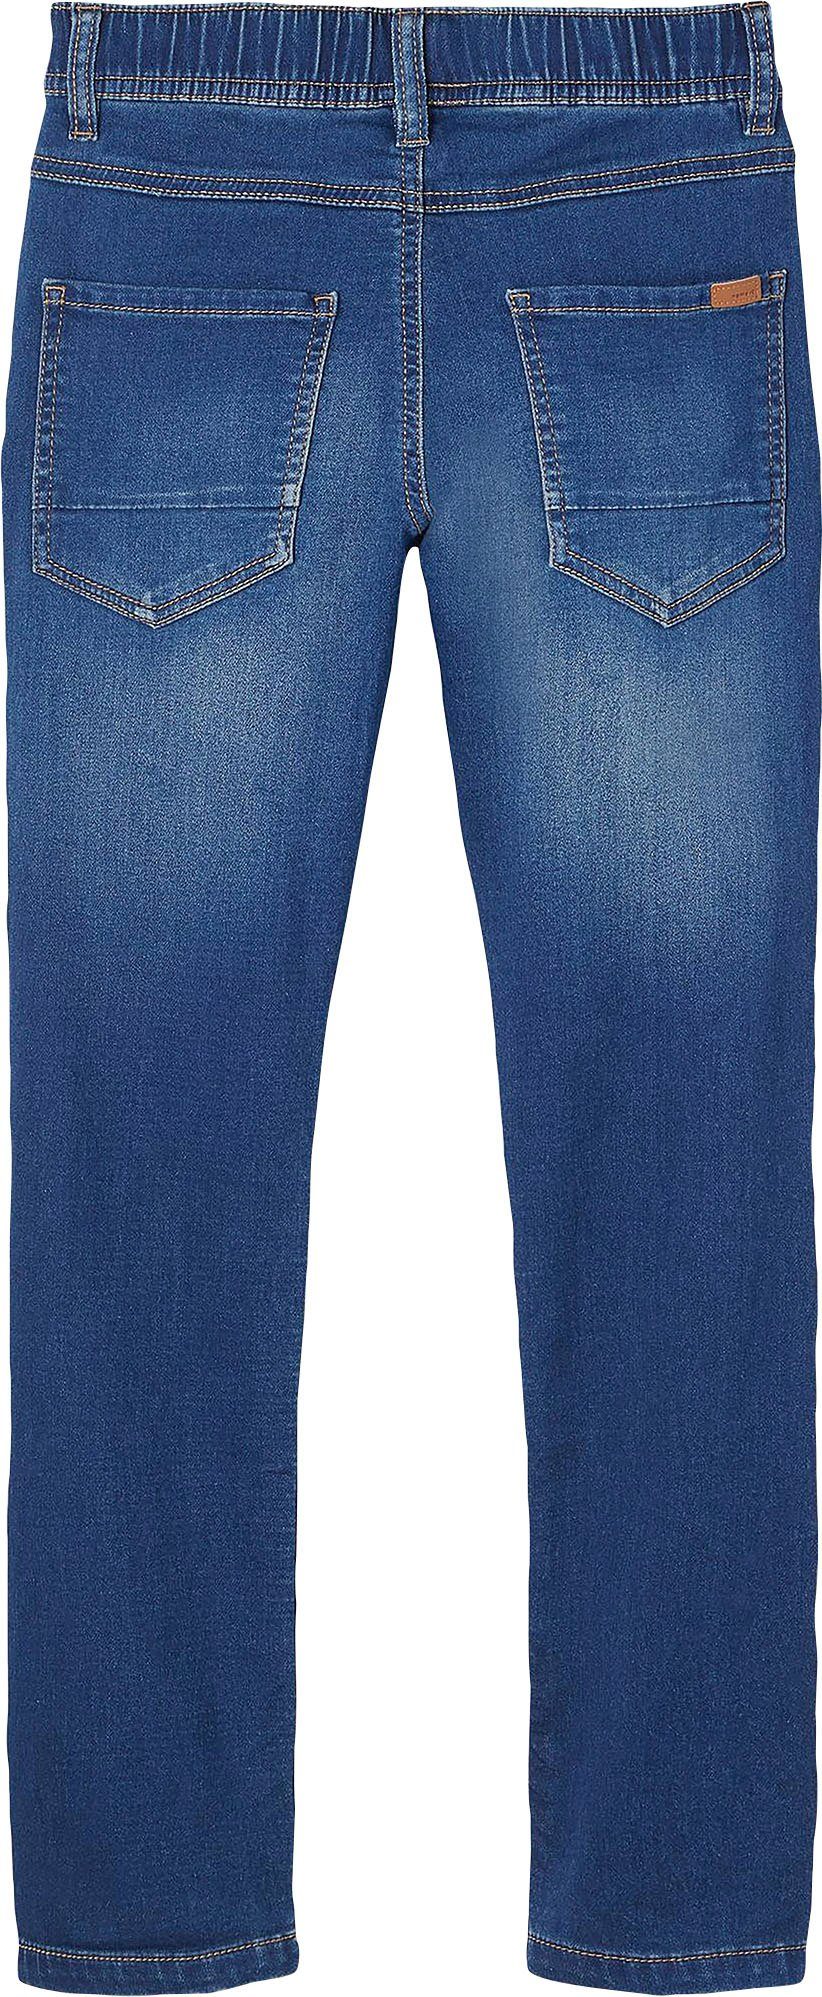 NKMROBIN It Stretch-Jeans DNMTHAYERS Name 3454